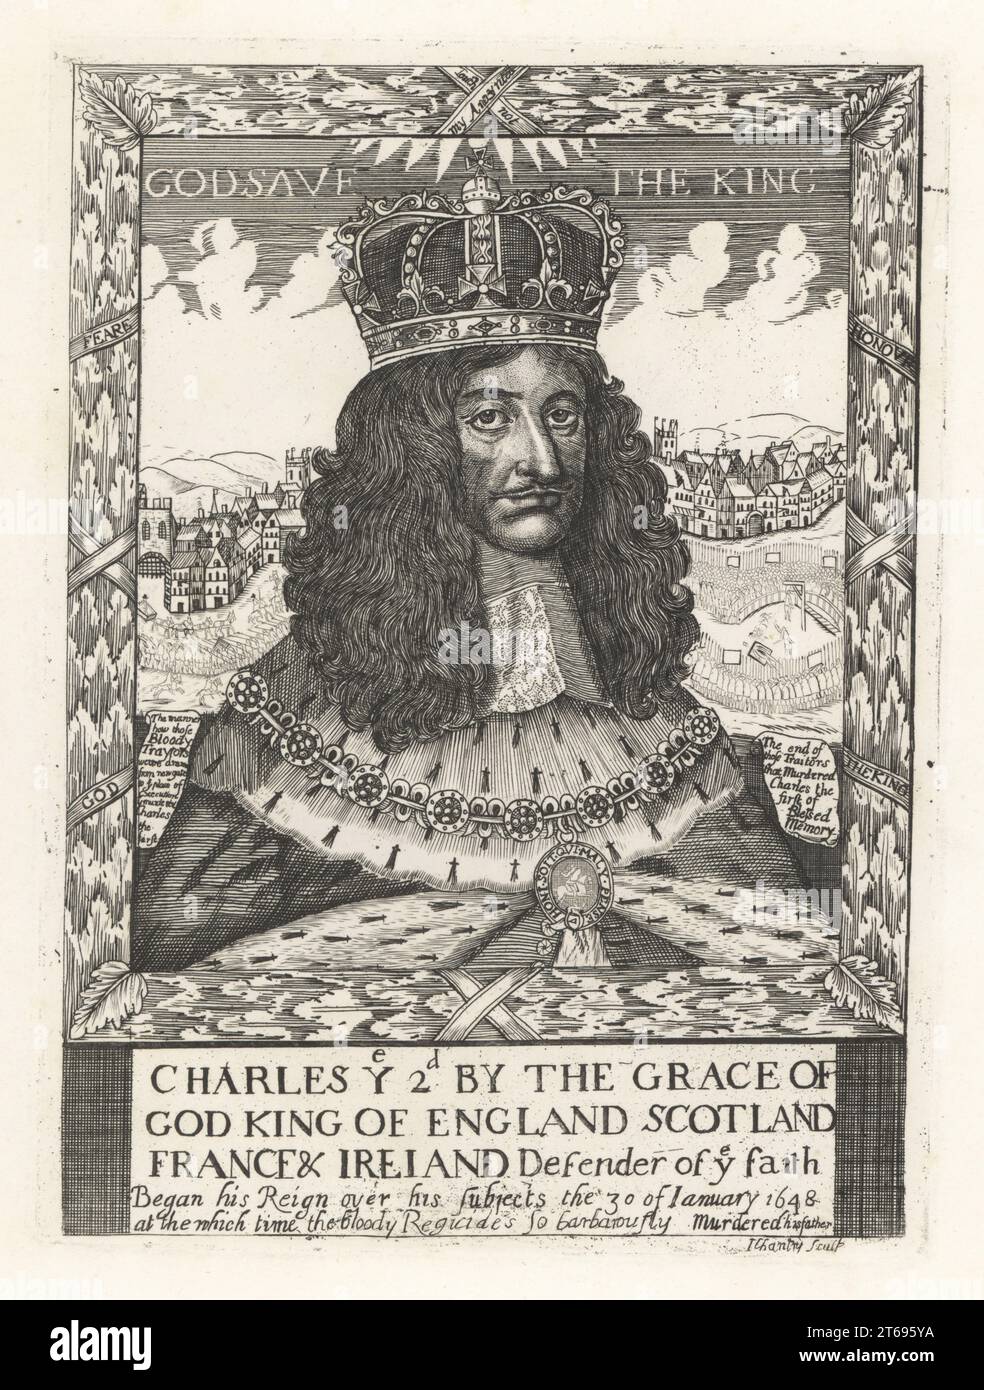 King Charles II of England, 1630-1685, with crown on his head, ermine mantle and collar of the Order of the Garter. View of the parade of the regicides of Charles I from Newgate to execution on Tower Hill in the background. Inscribed By the grace of God King of England, Scotland, France & Ireland. From a scarce and curious print by John Chantry. Copperplate engraving from Samuel Woodburns Gallery of Rare Portraits Consisting of Original Plates, George Jones, 102 St Martins Lane, London, 1816. Stock Photo